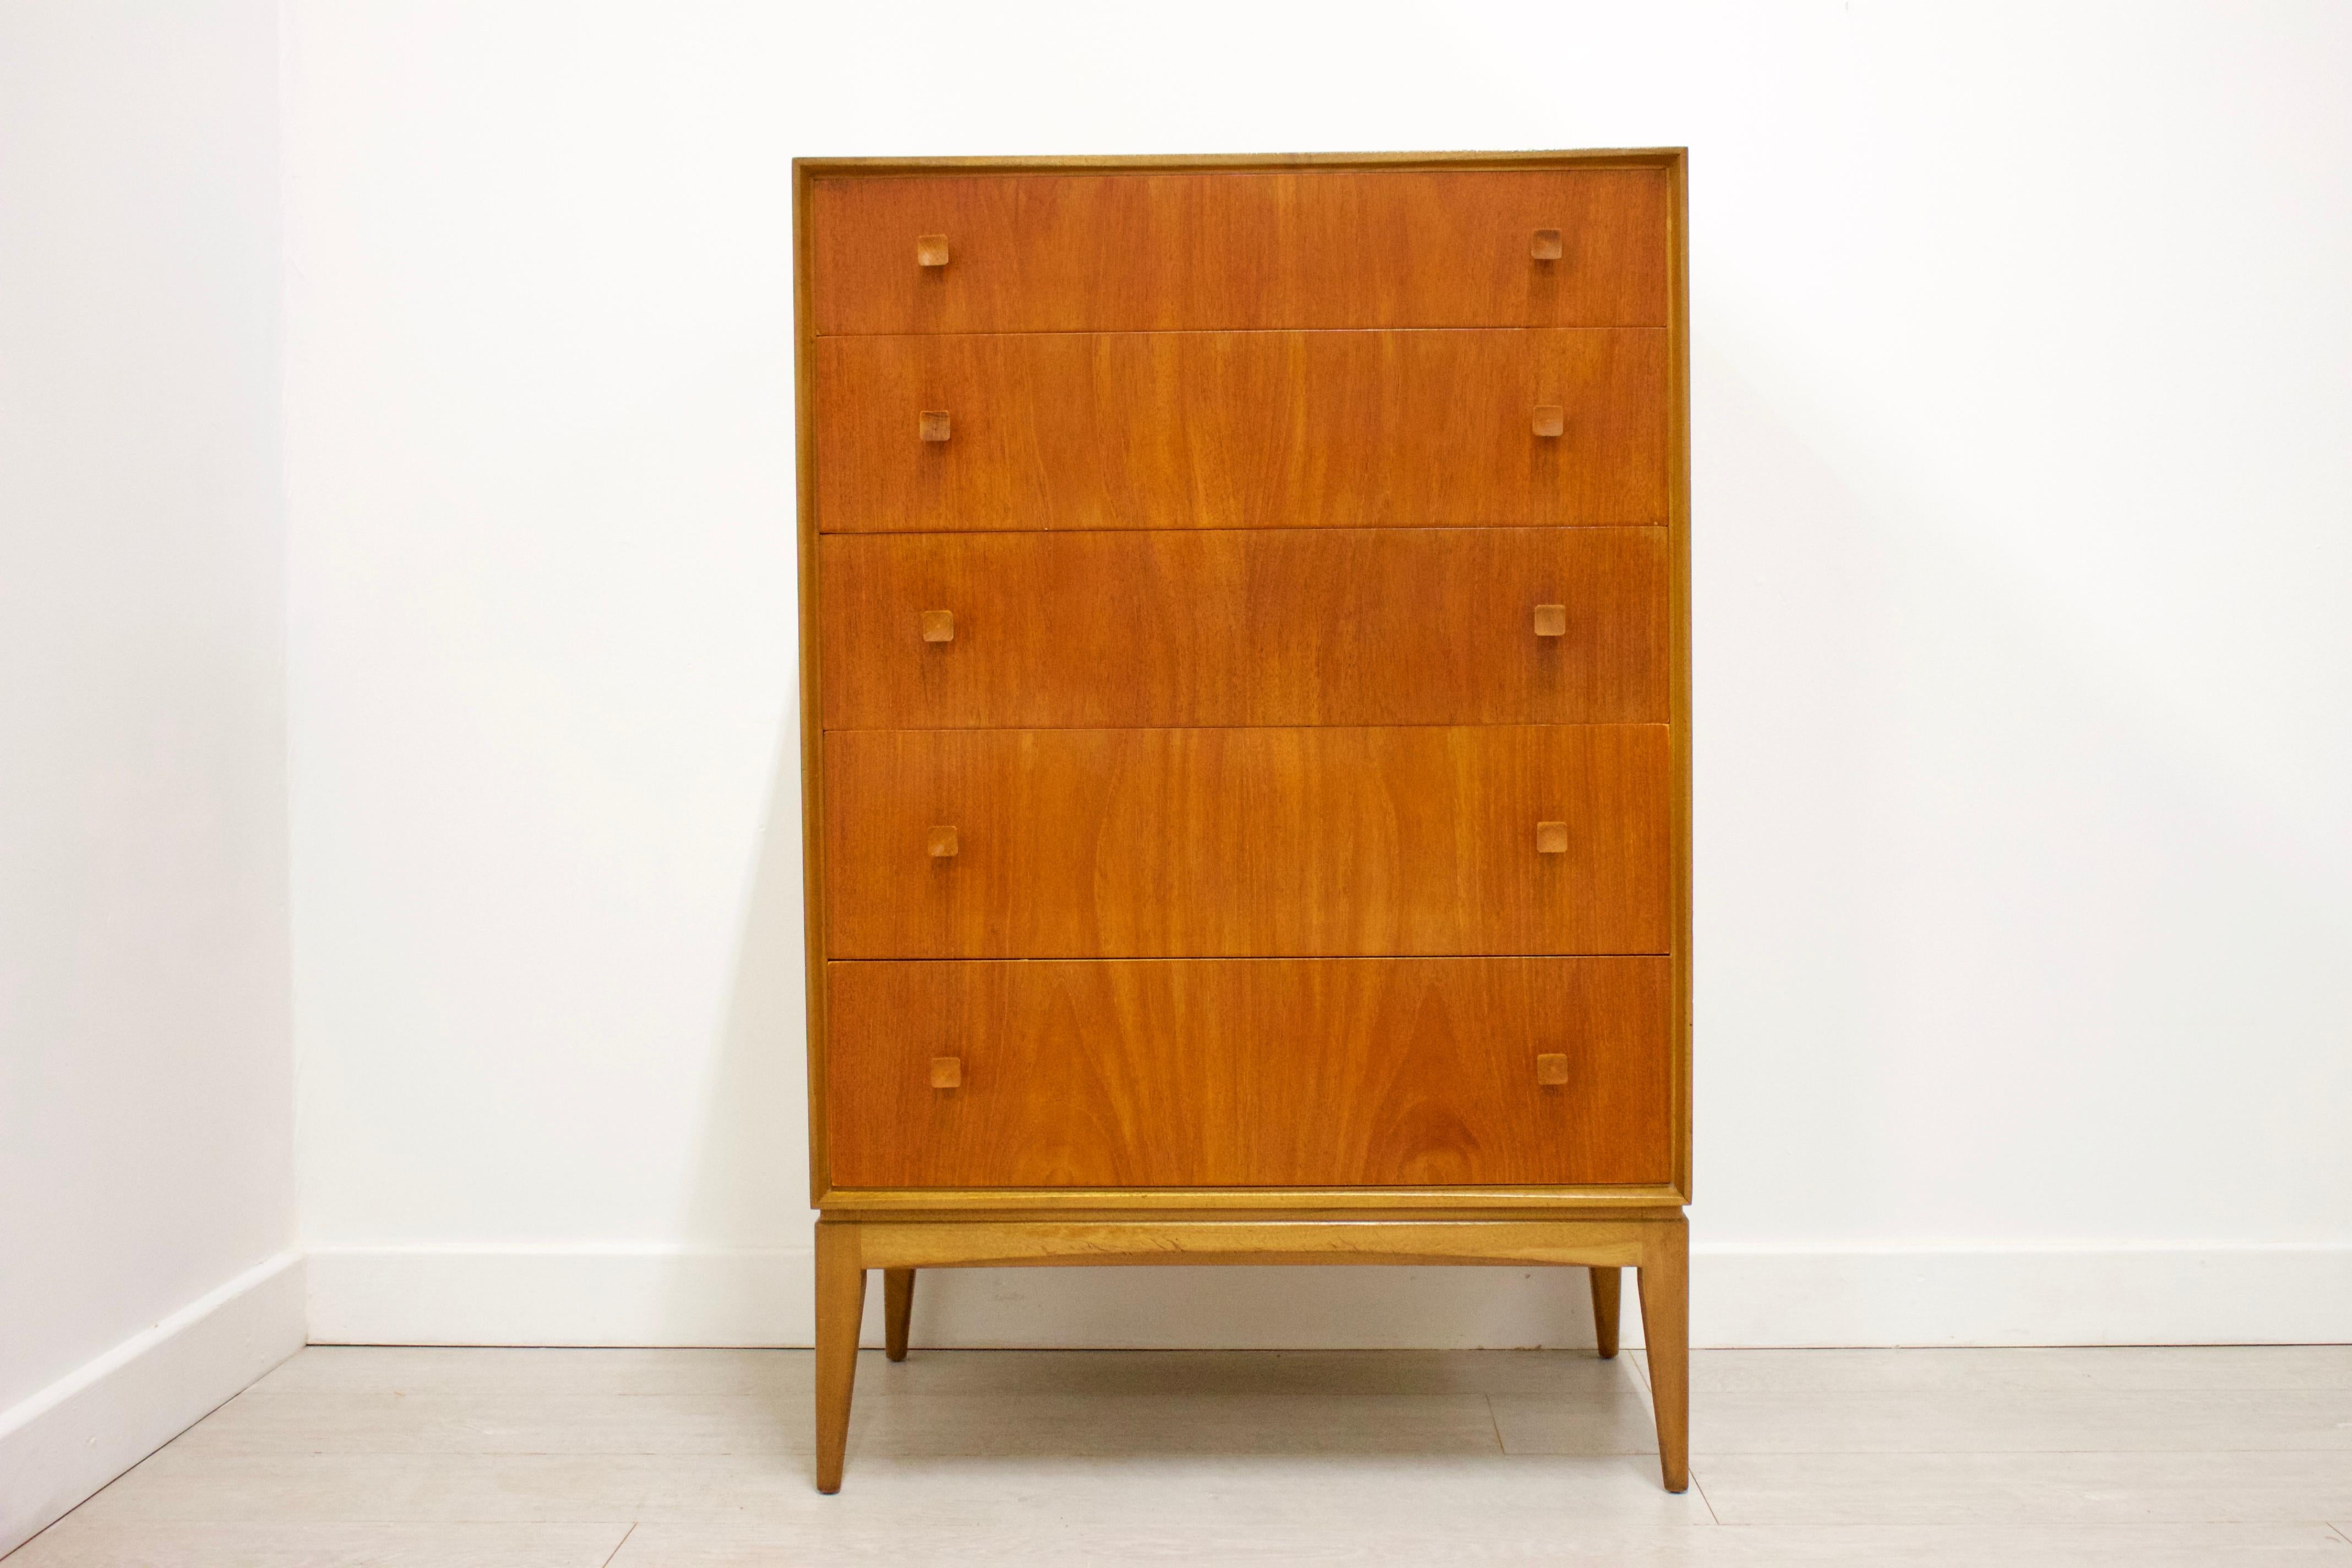 - Midcentury chest of drawers
- Manufactured in the UK by McIntosh
- Made from teak and teak veneer.